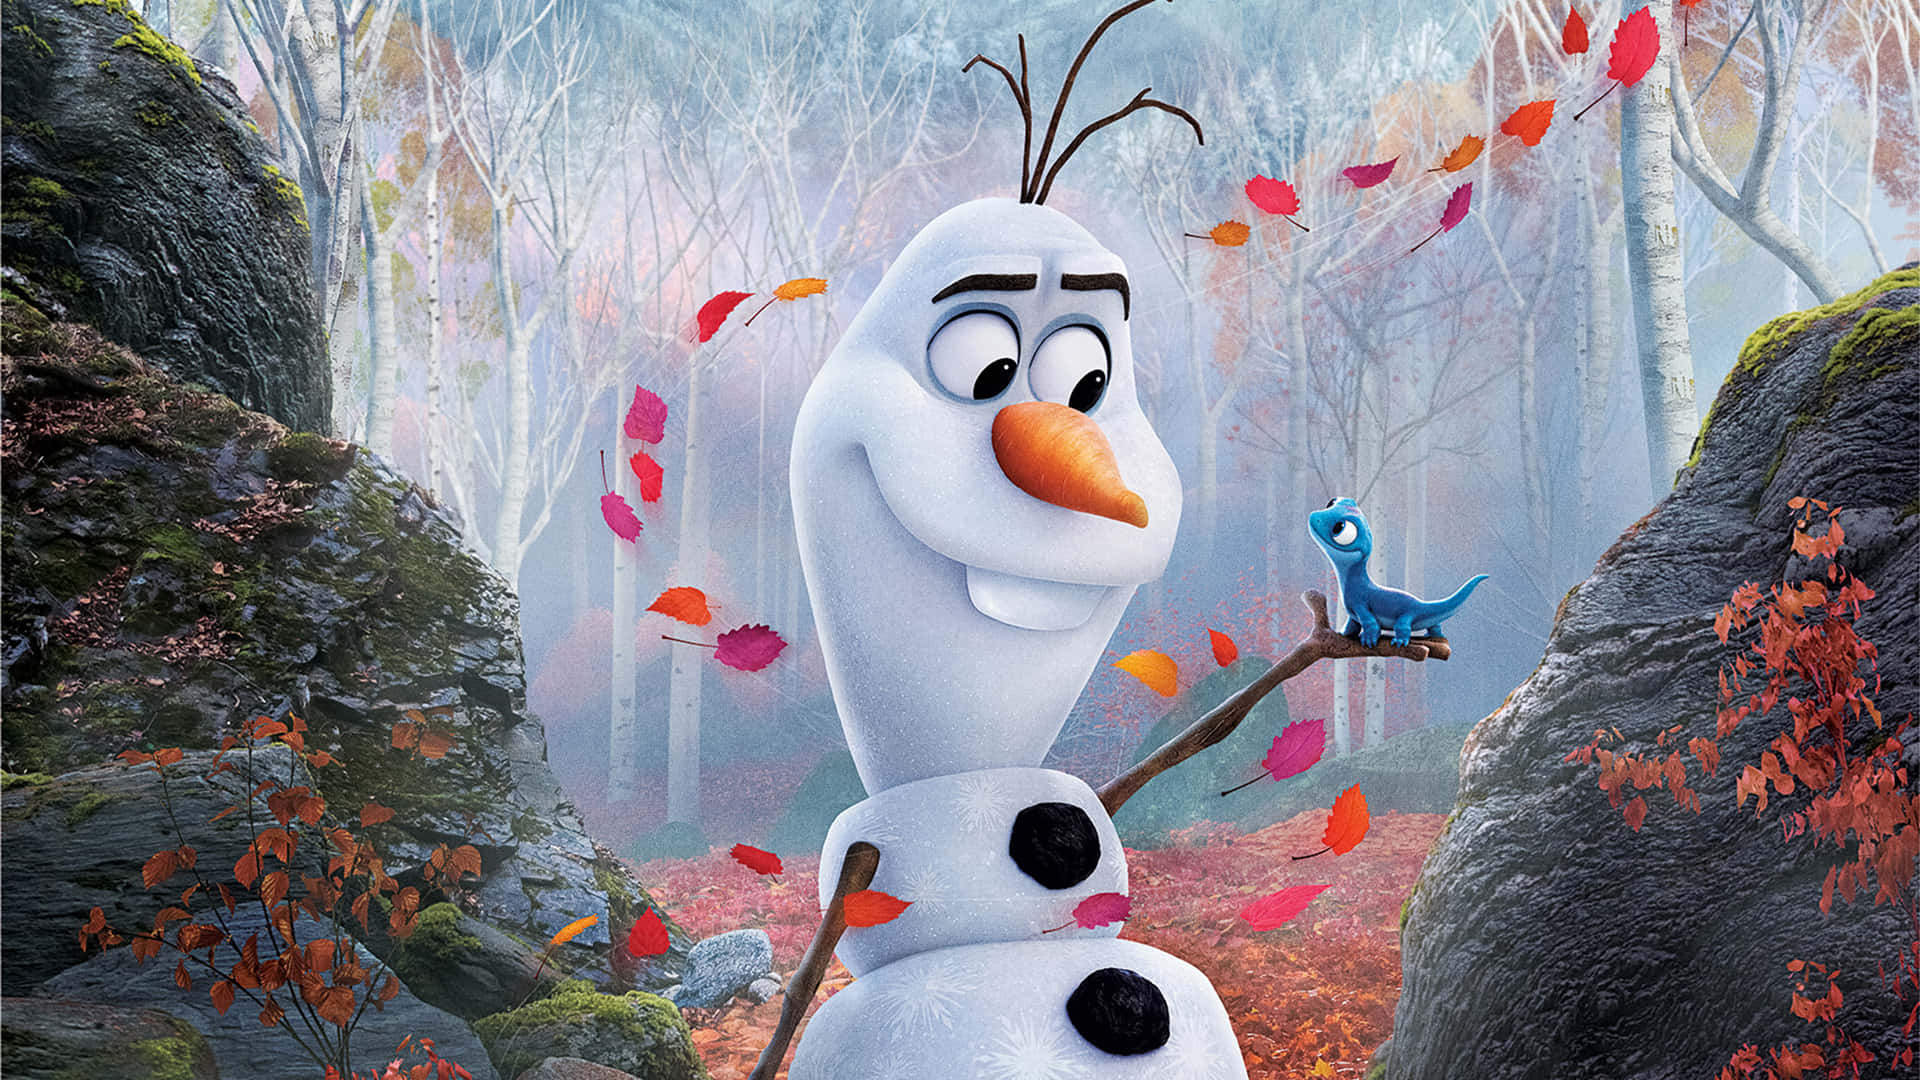 Everyone's Favourite Snowman, Olaf!